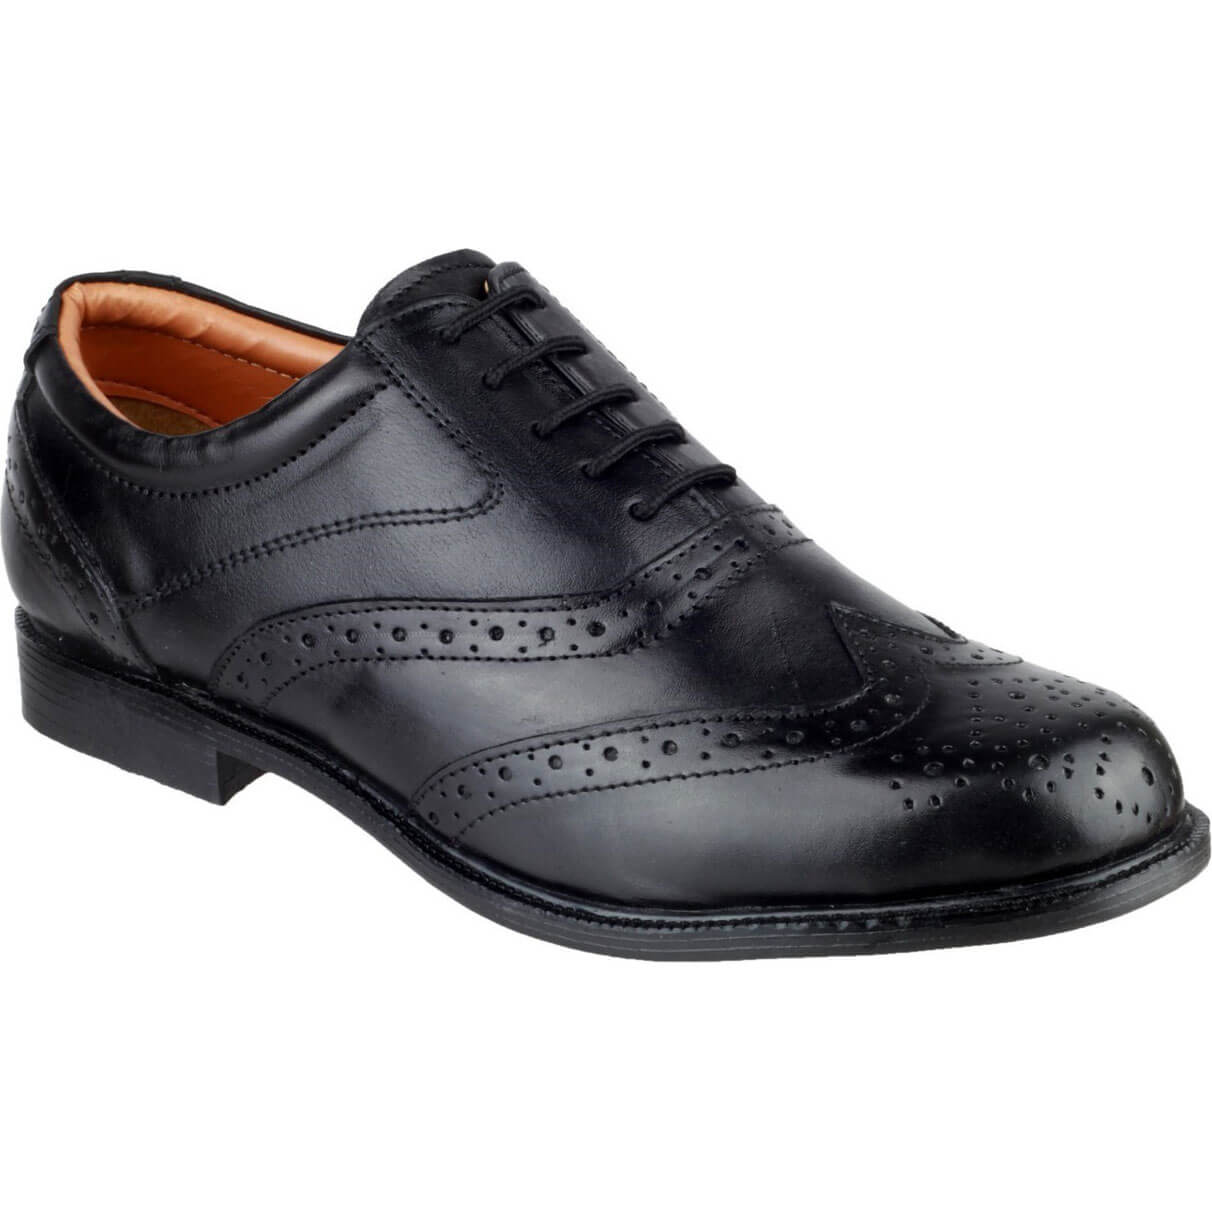 Image of Amblers Liverpool Oxford Brogue Black Size 6